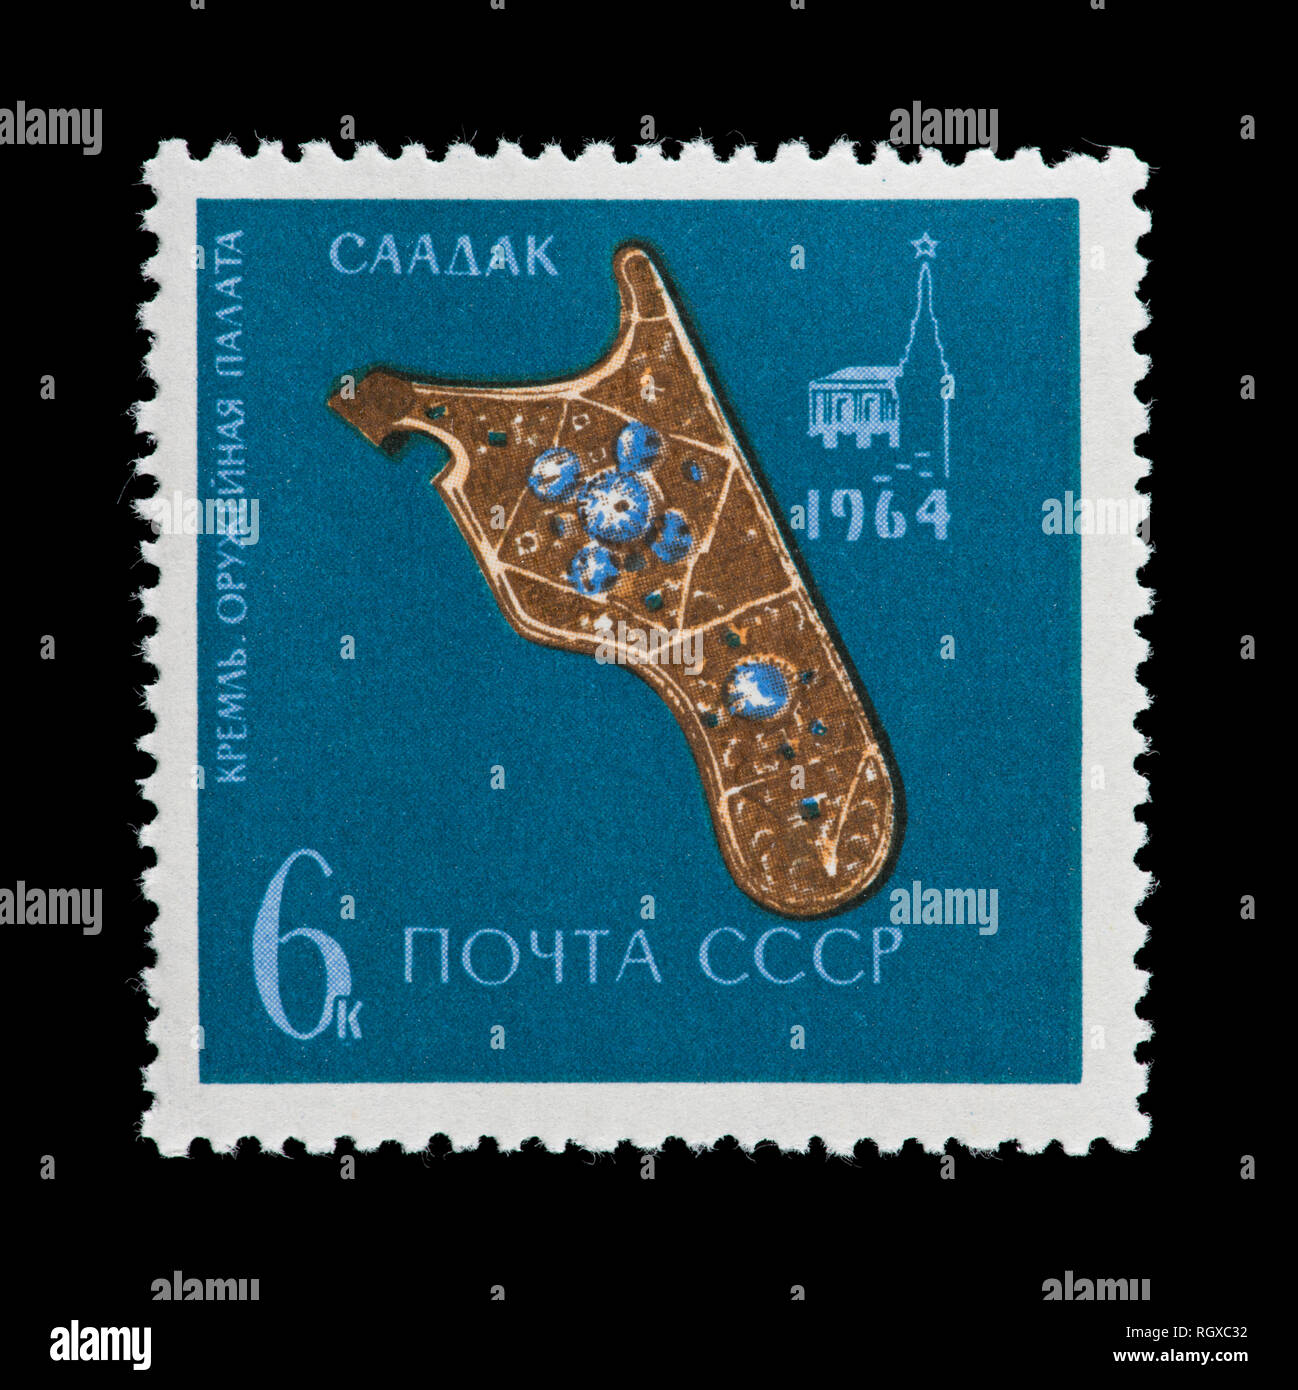 Postage stamp from the Soviet Union depicting a saddle, historical artifact from the Kremlin Treasury. Stock Photo